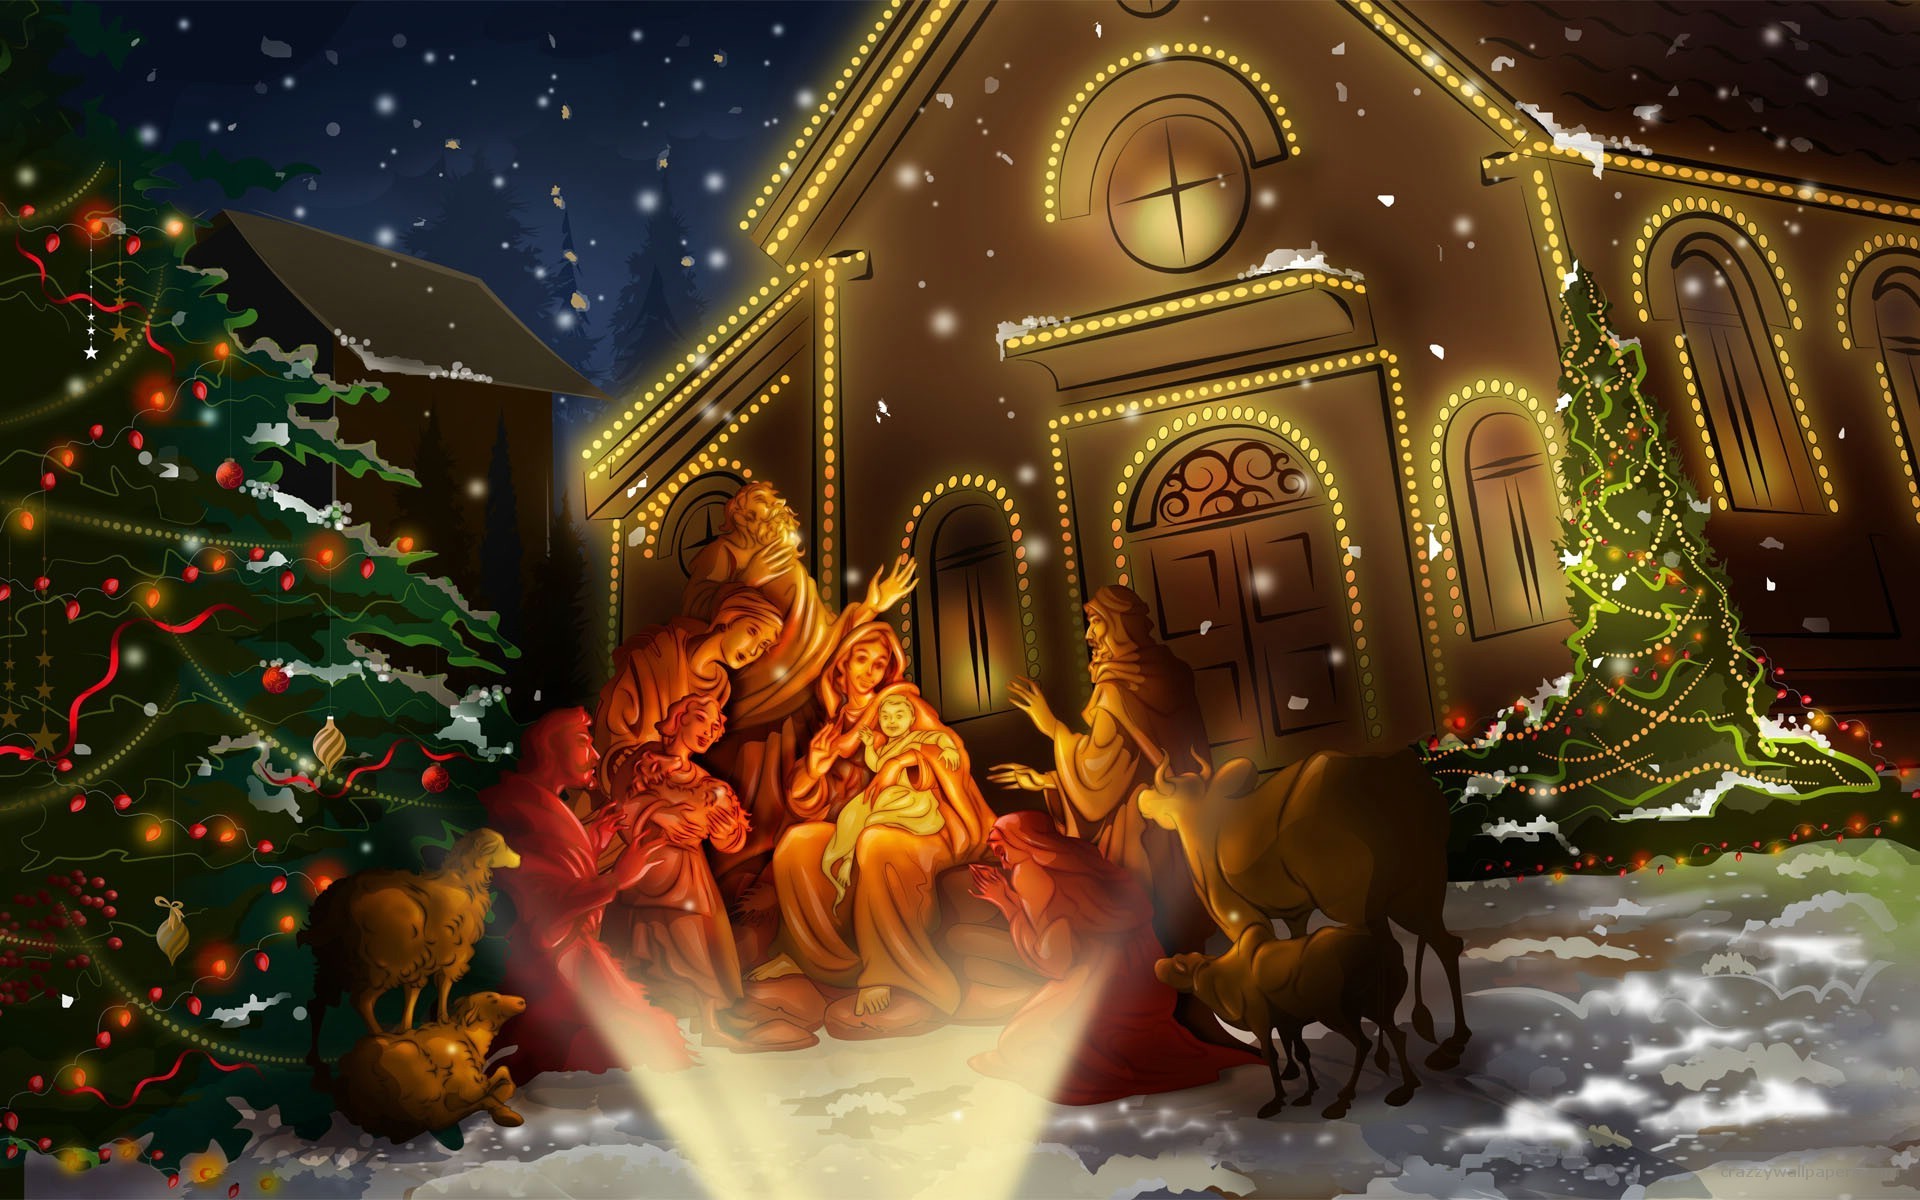 1920x1200 Download Link : Link Image Download. View Original Images : 3D Twitter  Backgrounds Animated Twitter Backgrounds Christmas